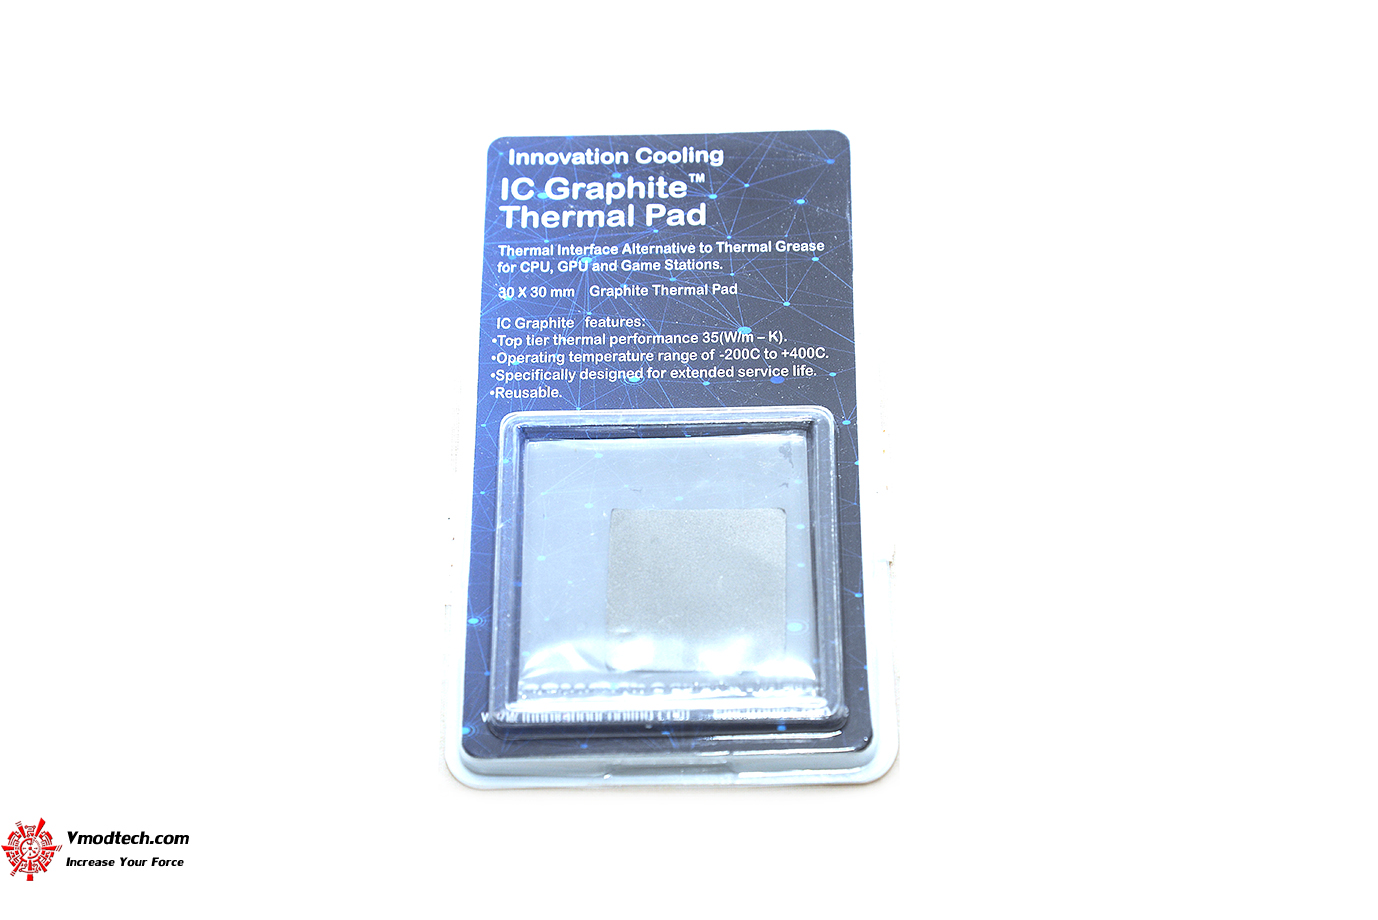 dsc 4822 IC Graphite Thermal Pad Review